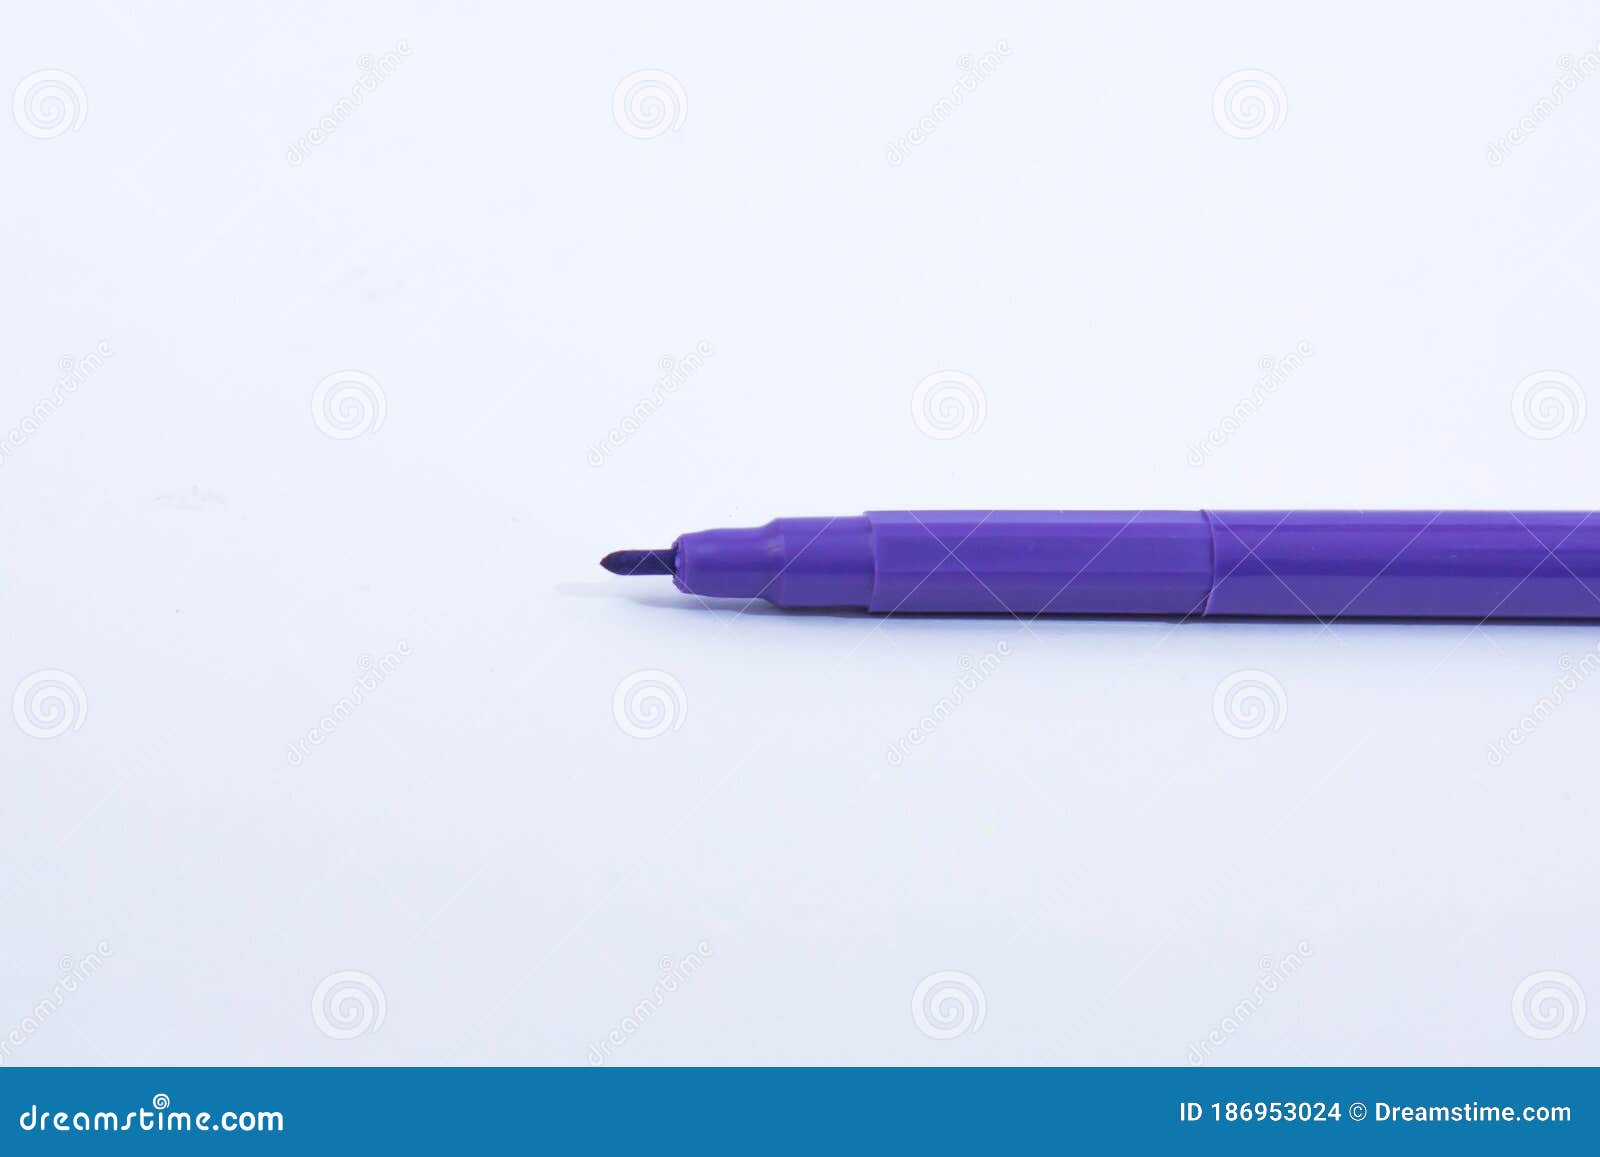 Free Cliparts Pen Drawing Download Free Cliparts Pen Drawing png images  Free ClipArts on Clipart Library